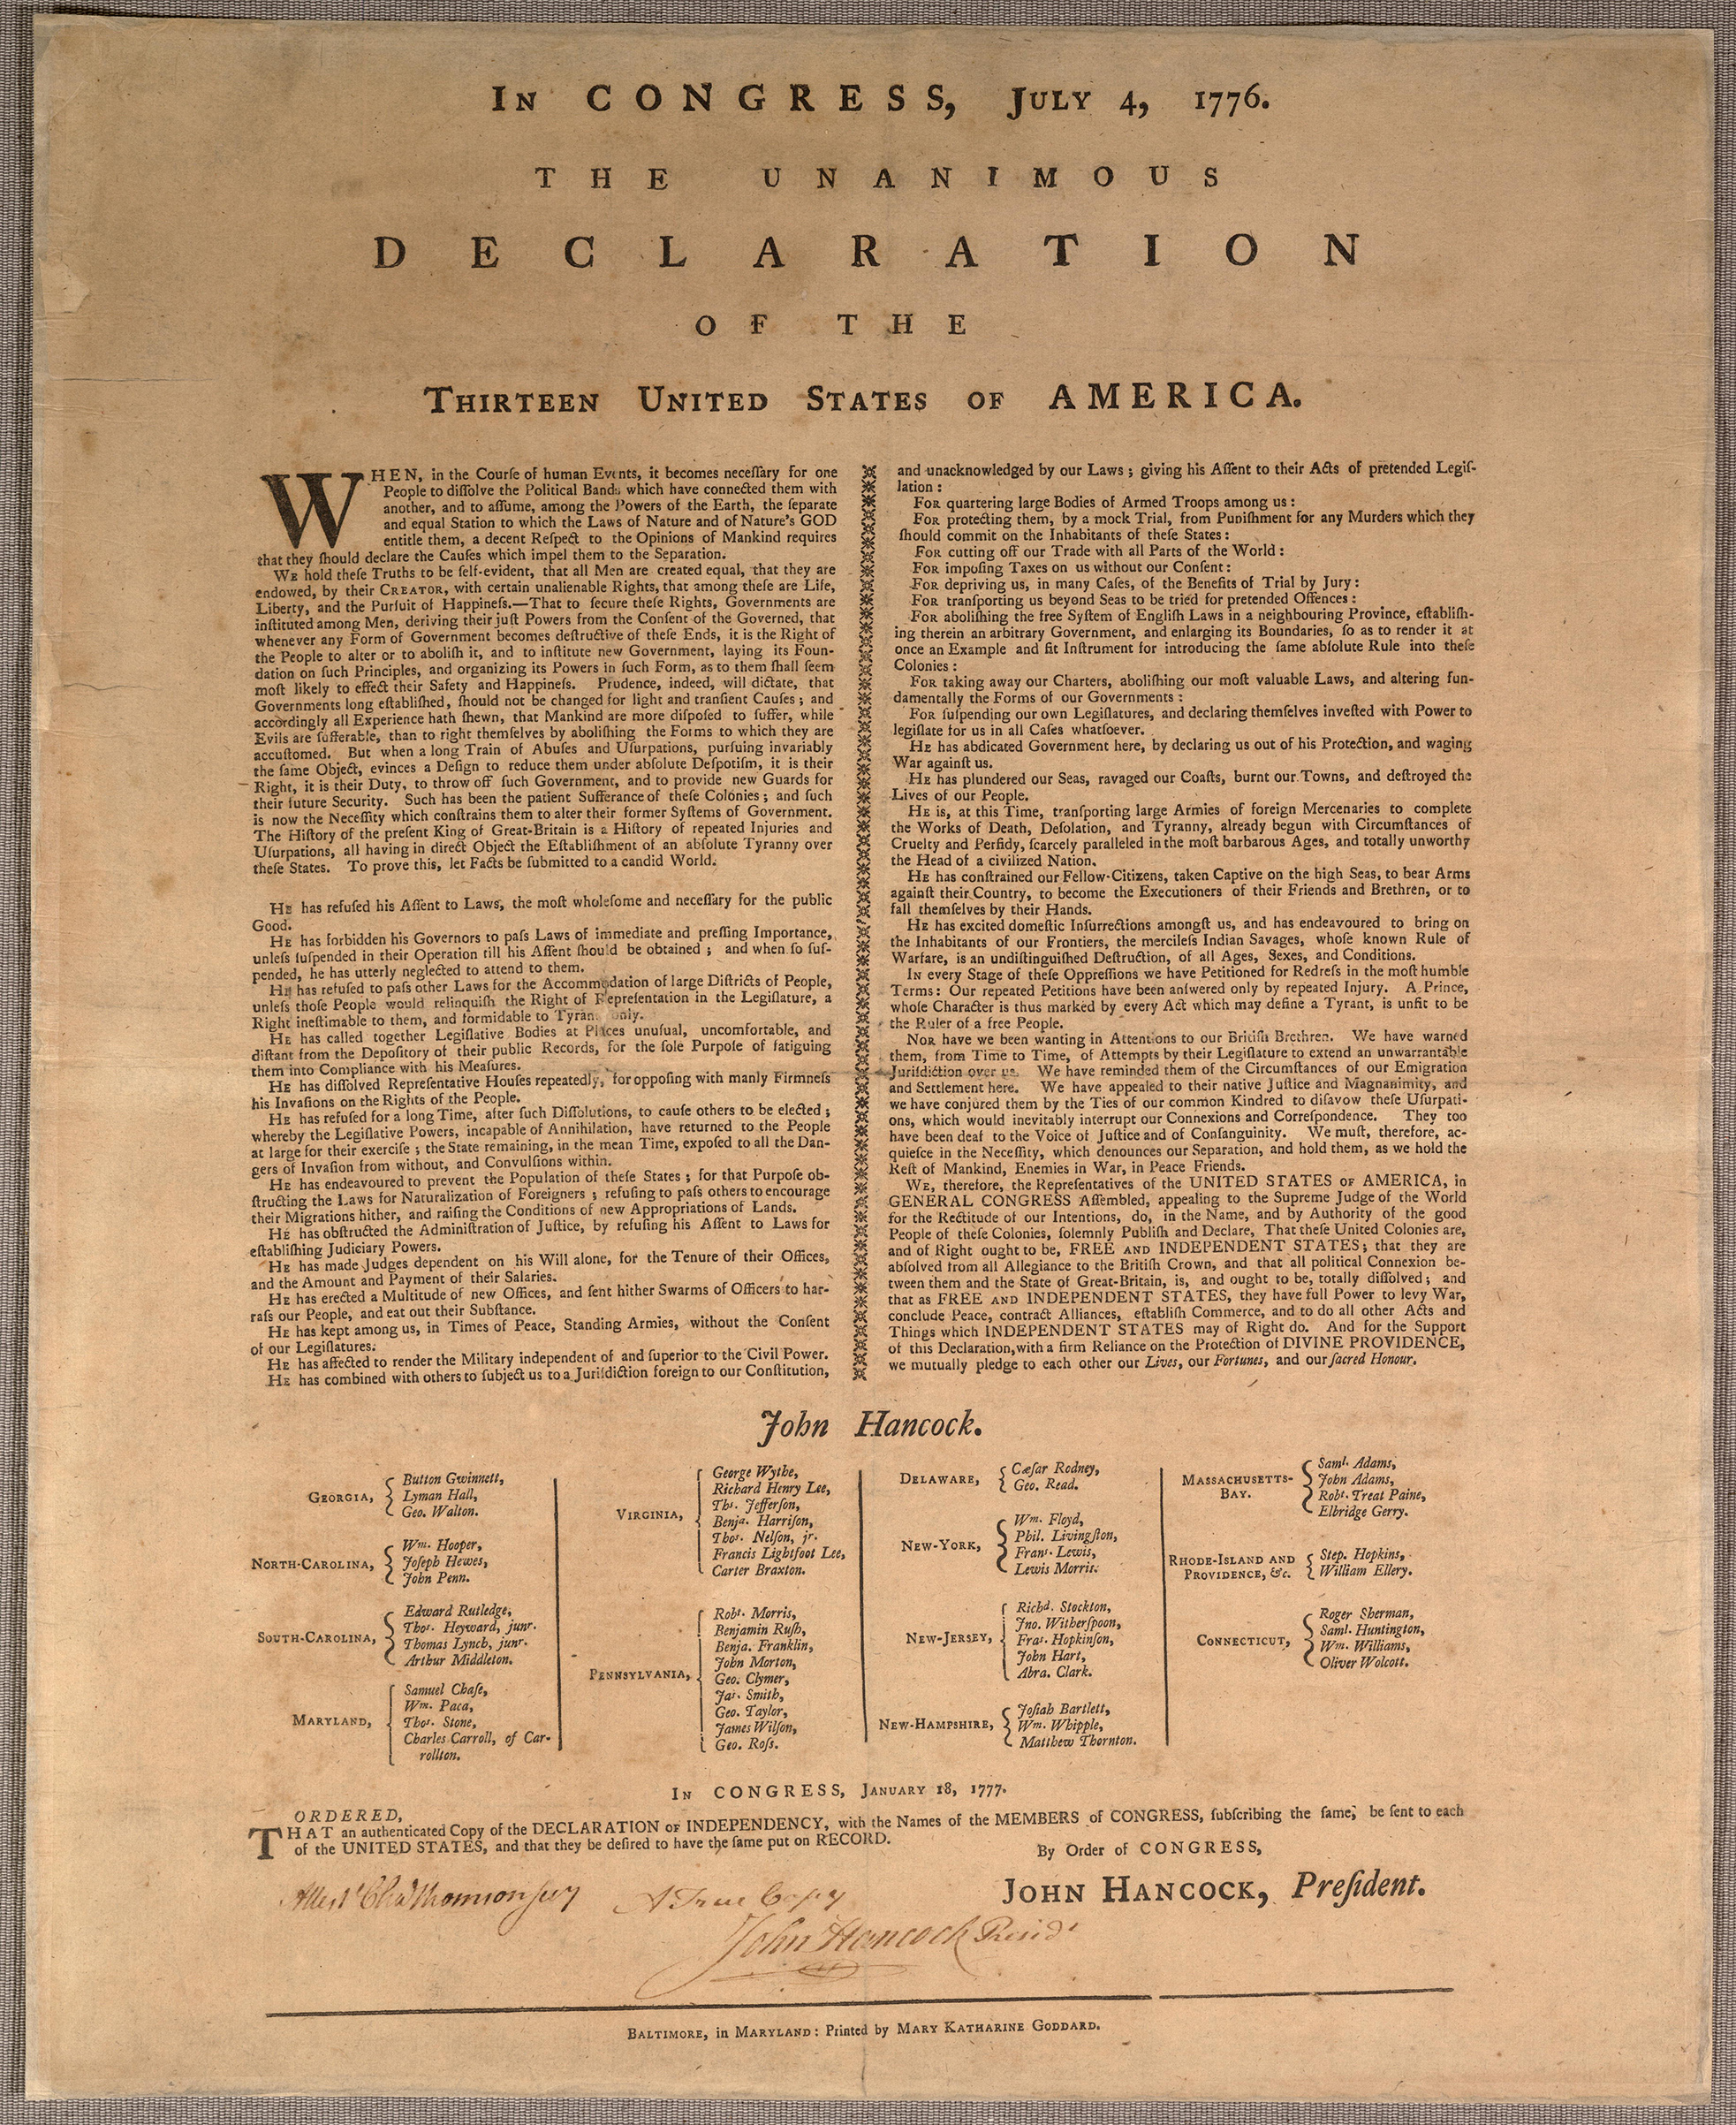 The first issue of the Declaration of Independence